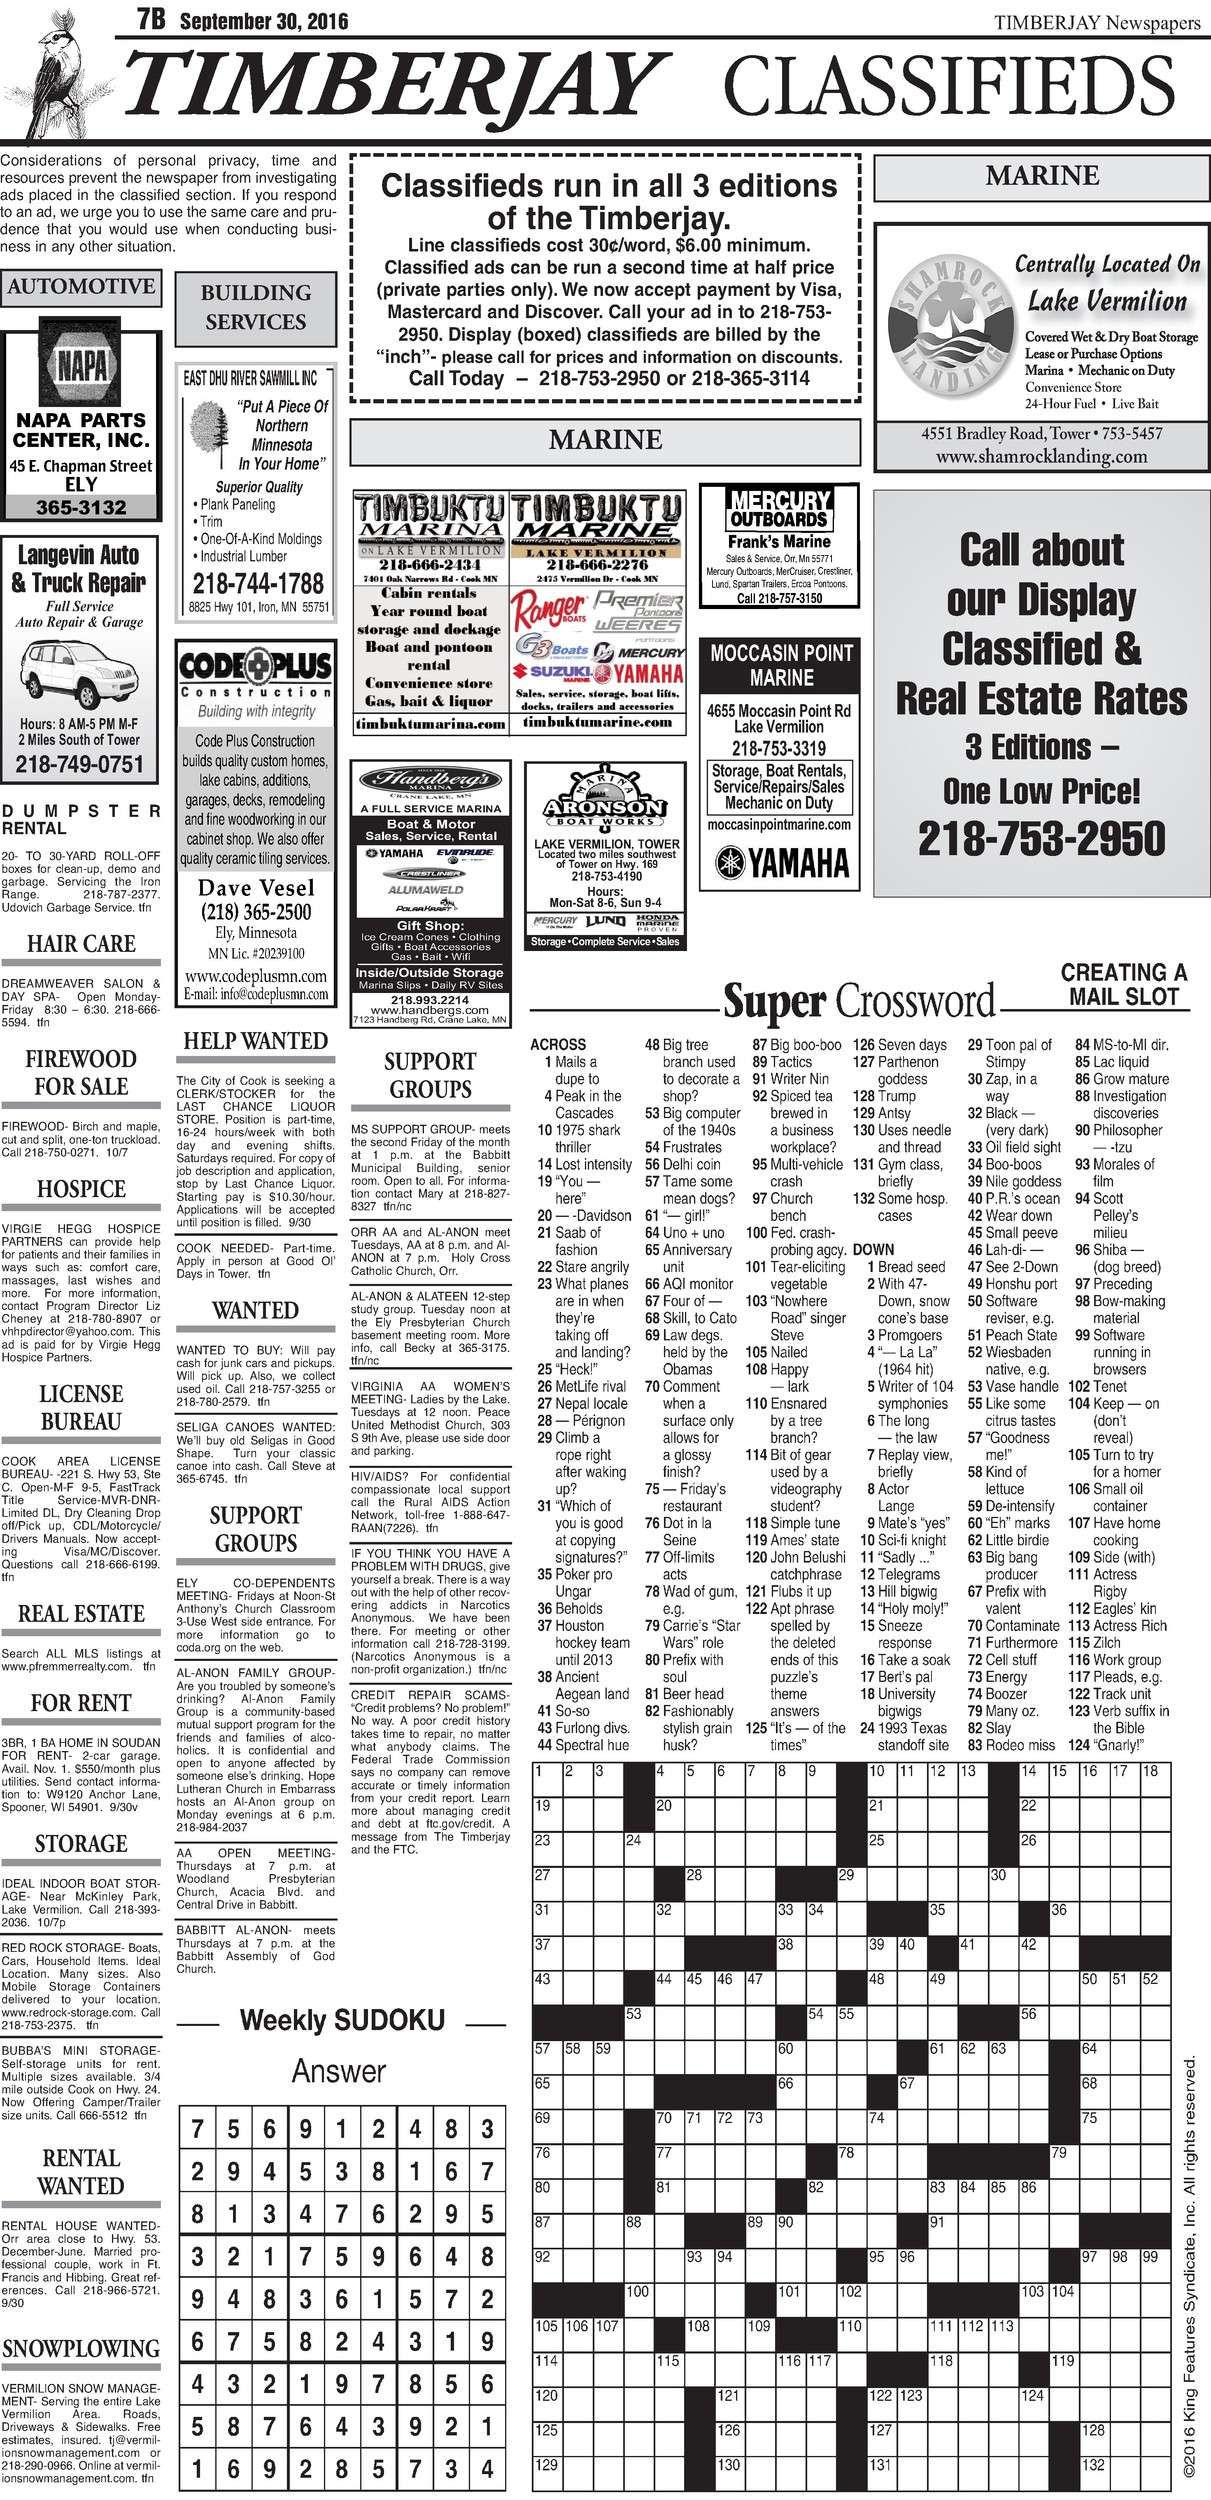 Click here to read the legal notices and classifieds on page B7